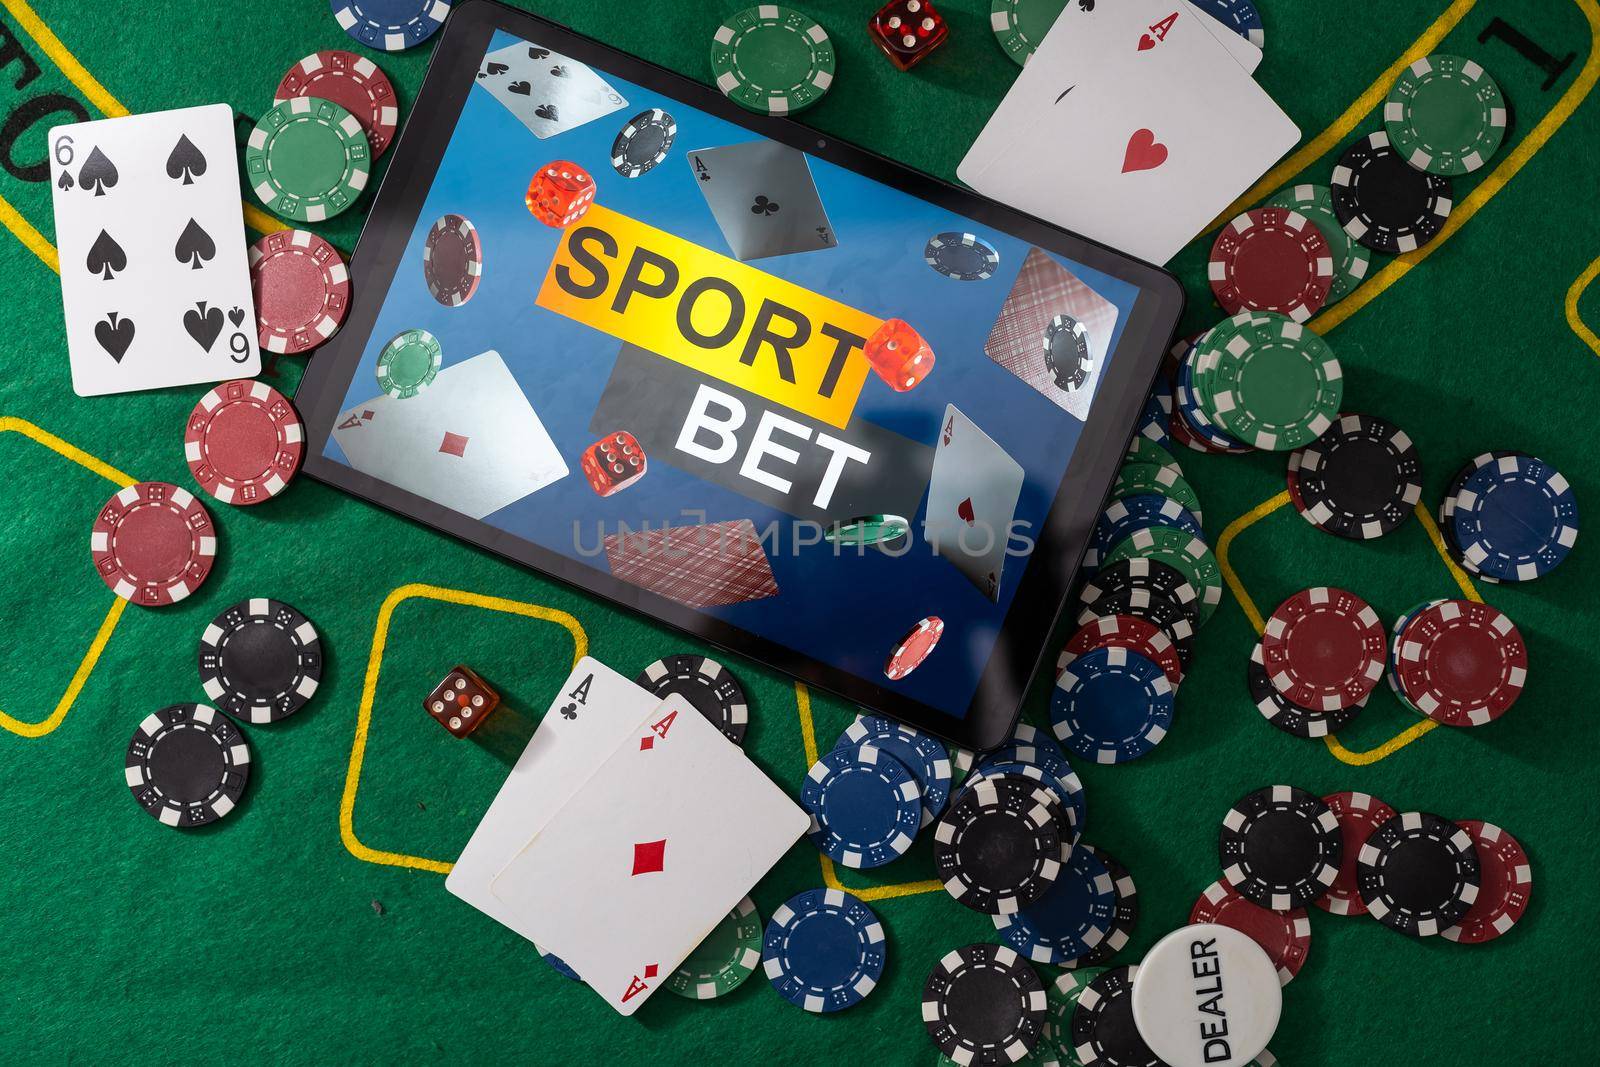 Gambling online casino Internet betting concept green screen. smartphone with poker chips, dice. Jackpot, casino chips